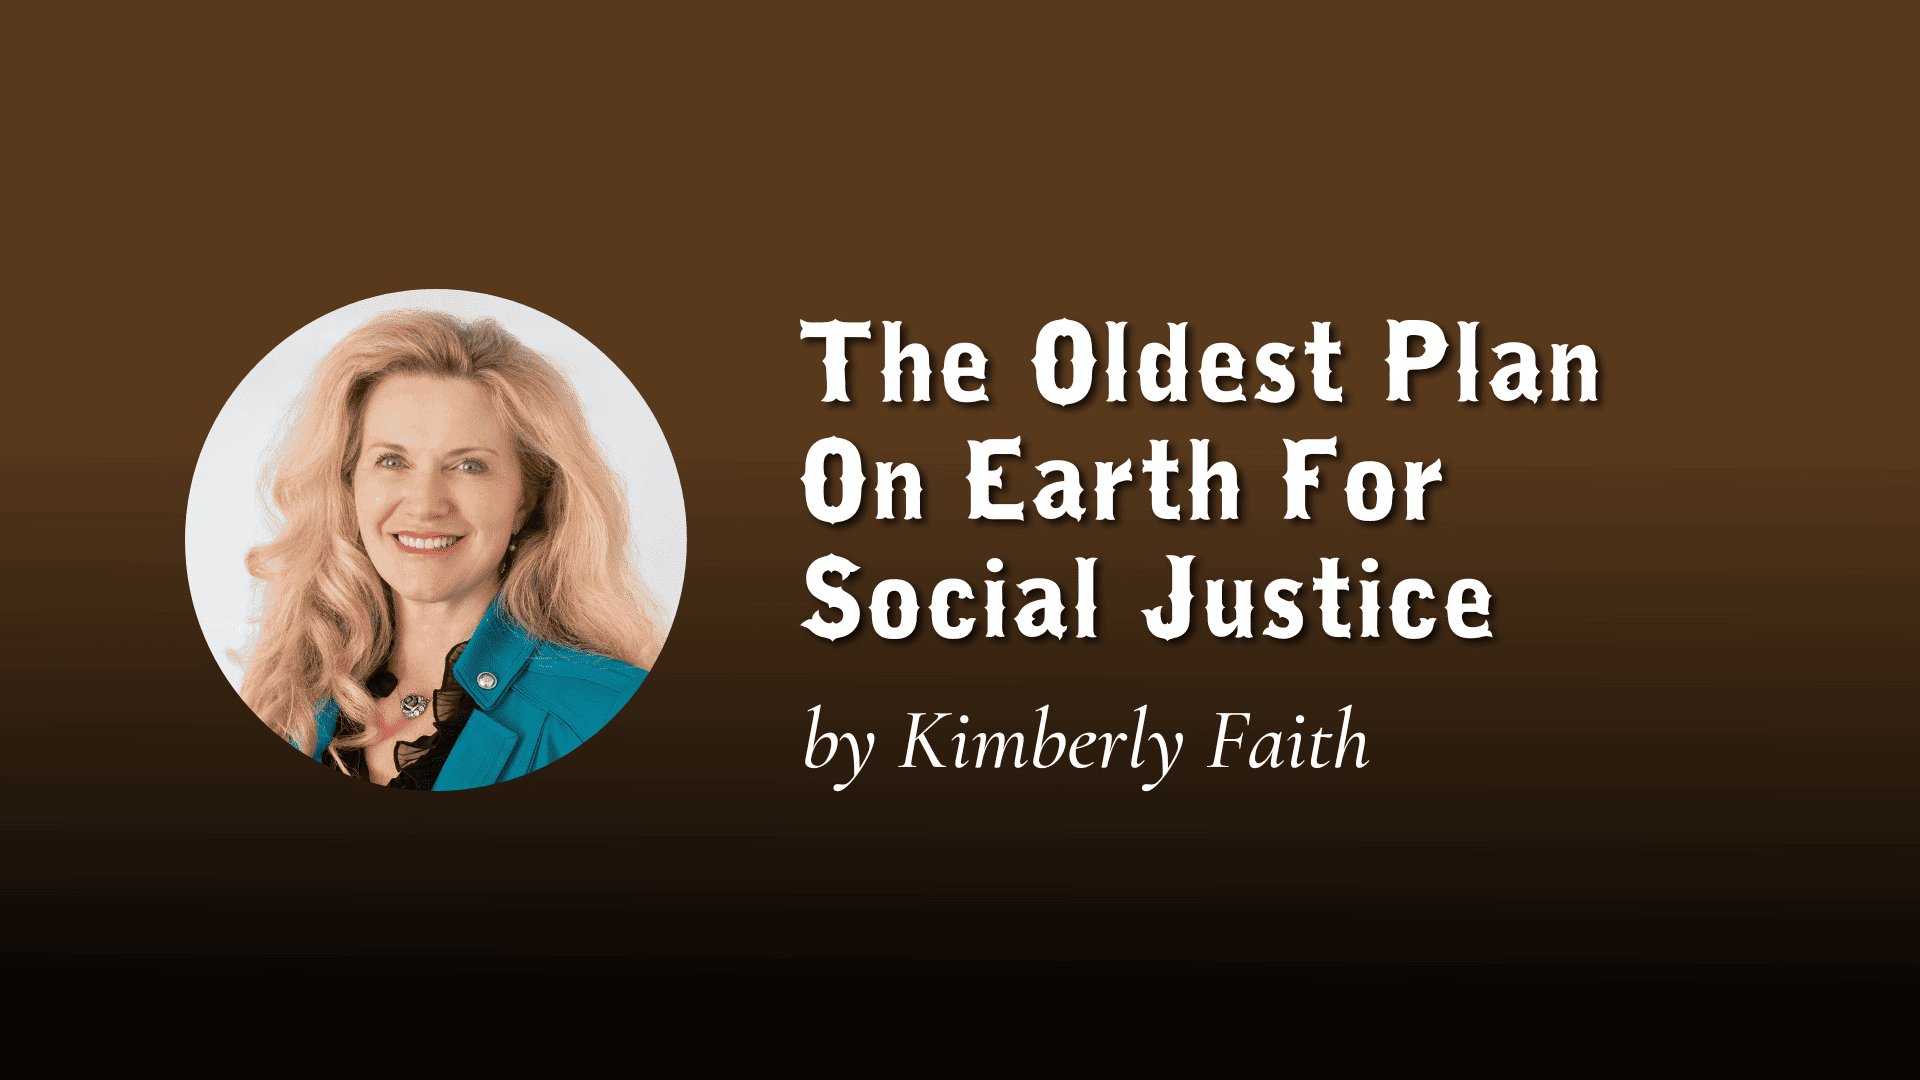 The Oldest Plan On Earth For Social Justice